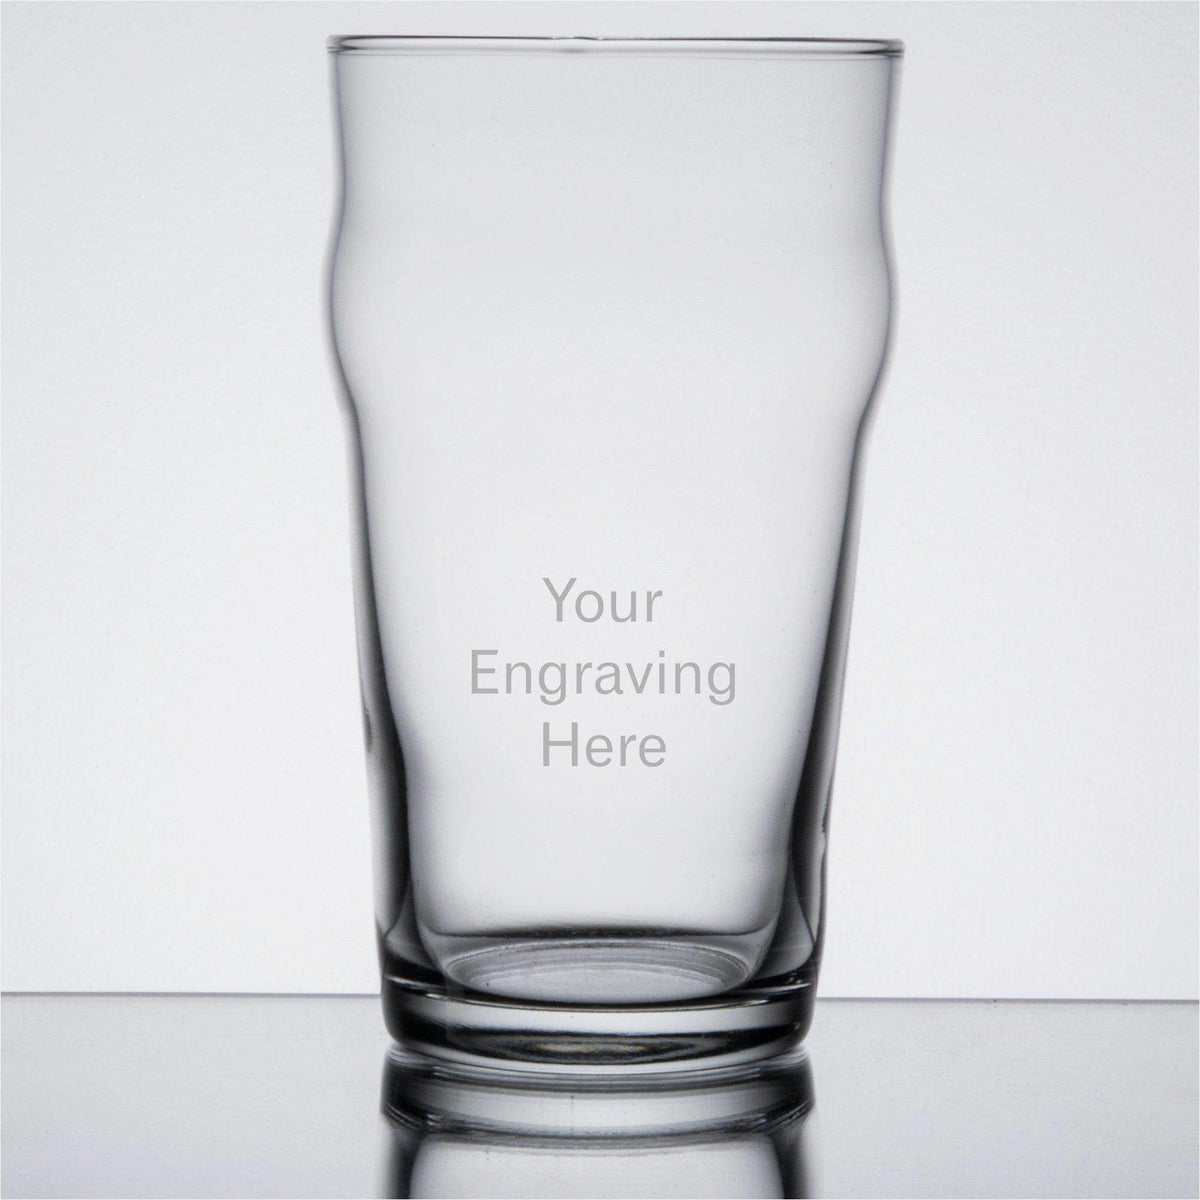 English pub drinking glass with "your engraving here" text